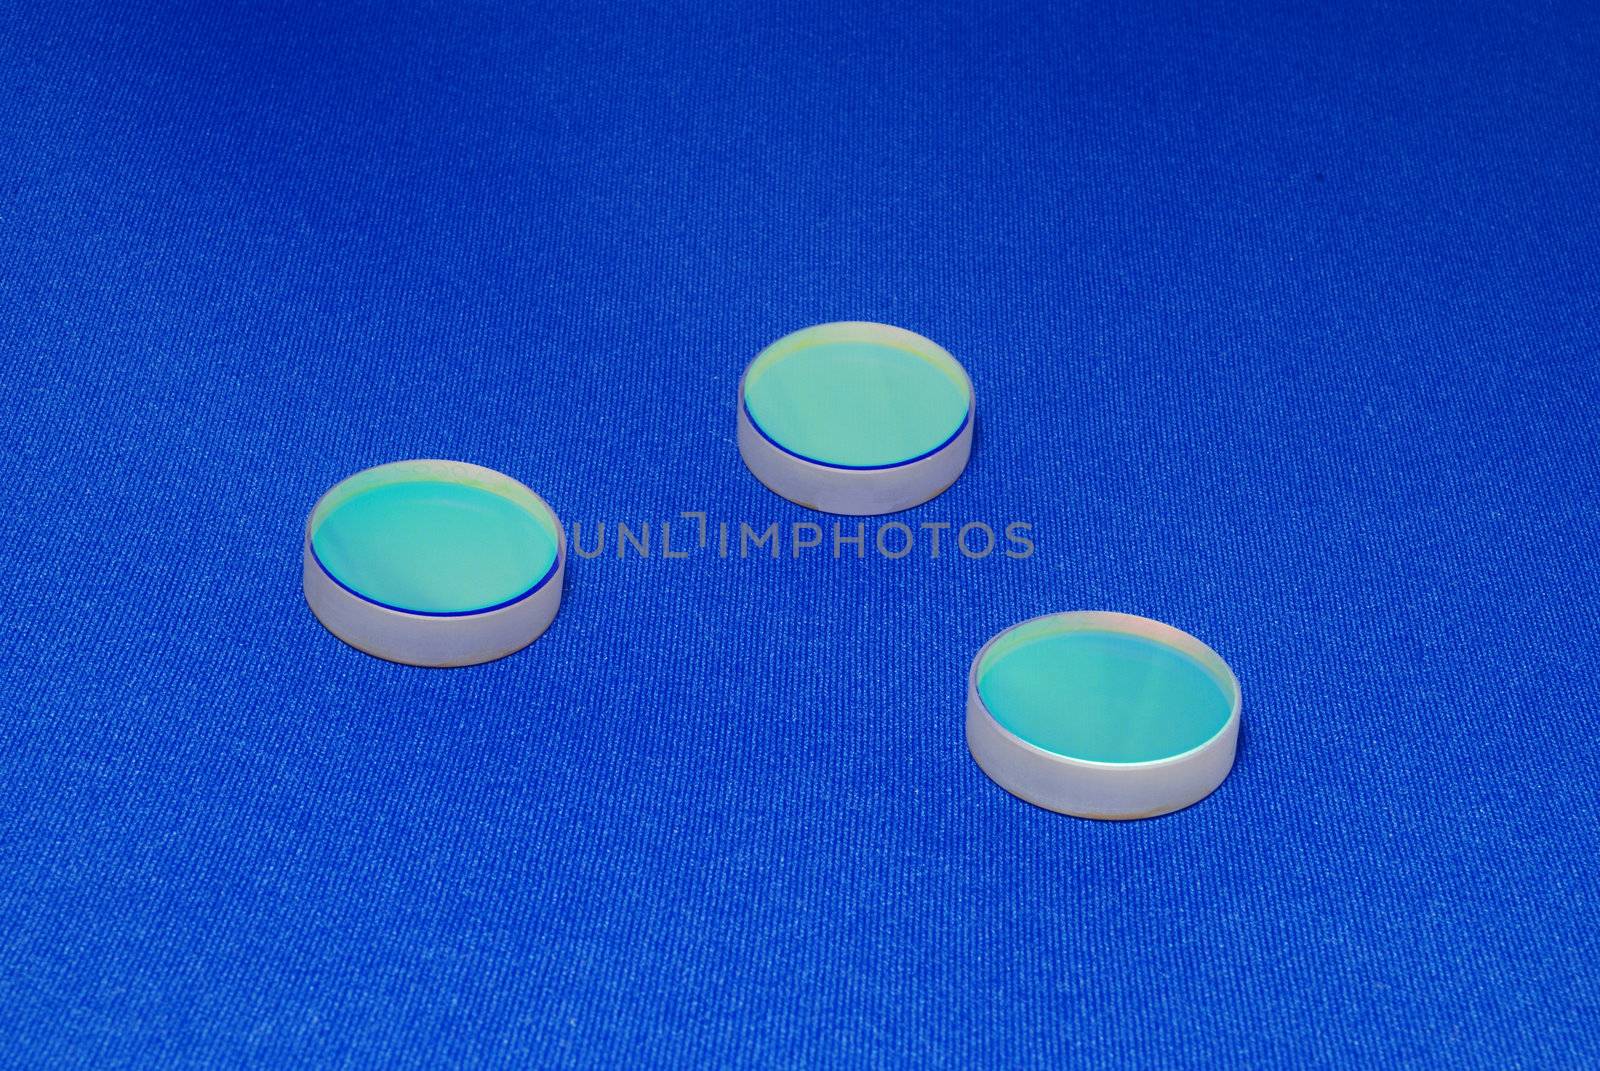  laser industry optical components ; flat thick mirrors with special reflection coating used in Laboratory Science and in Laser Manufacture on the blue canvas background